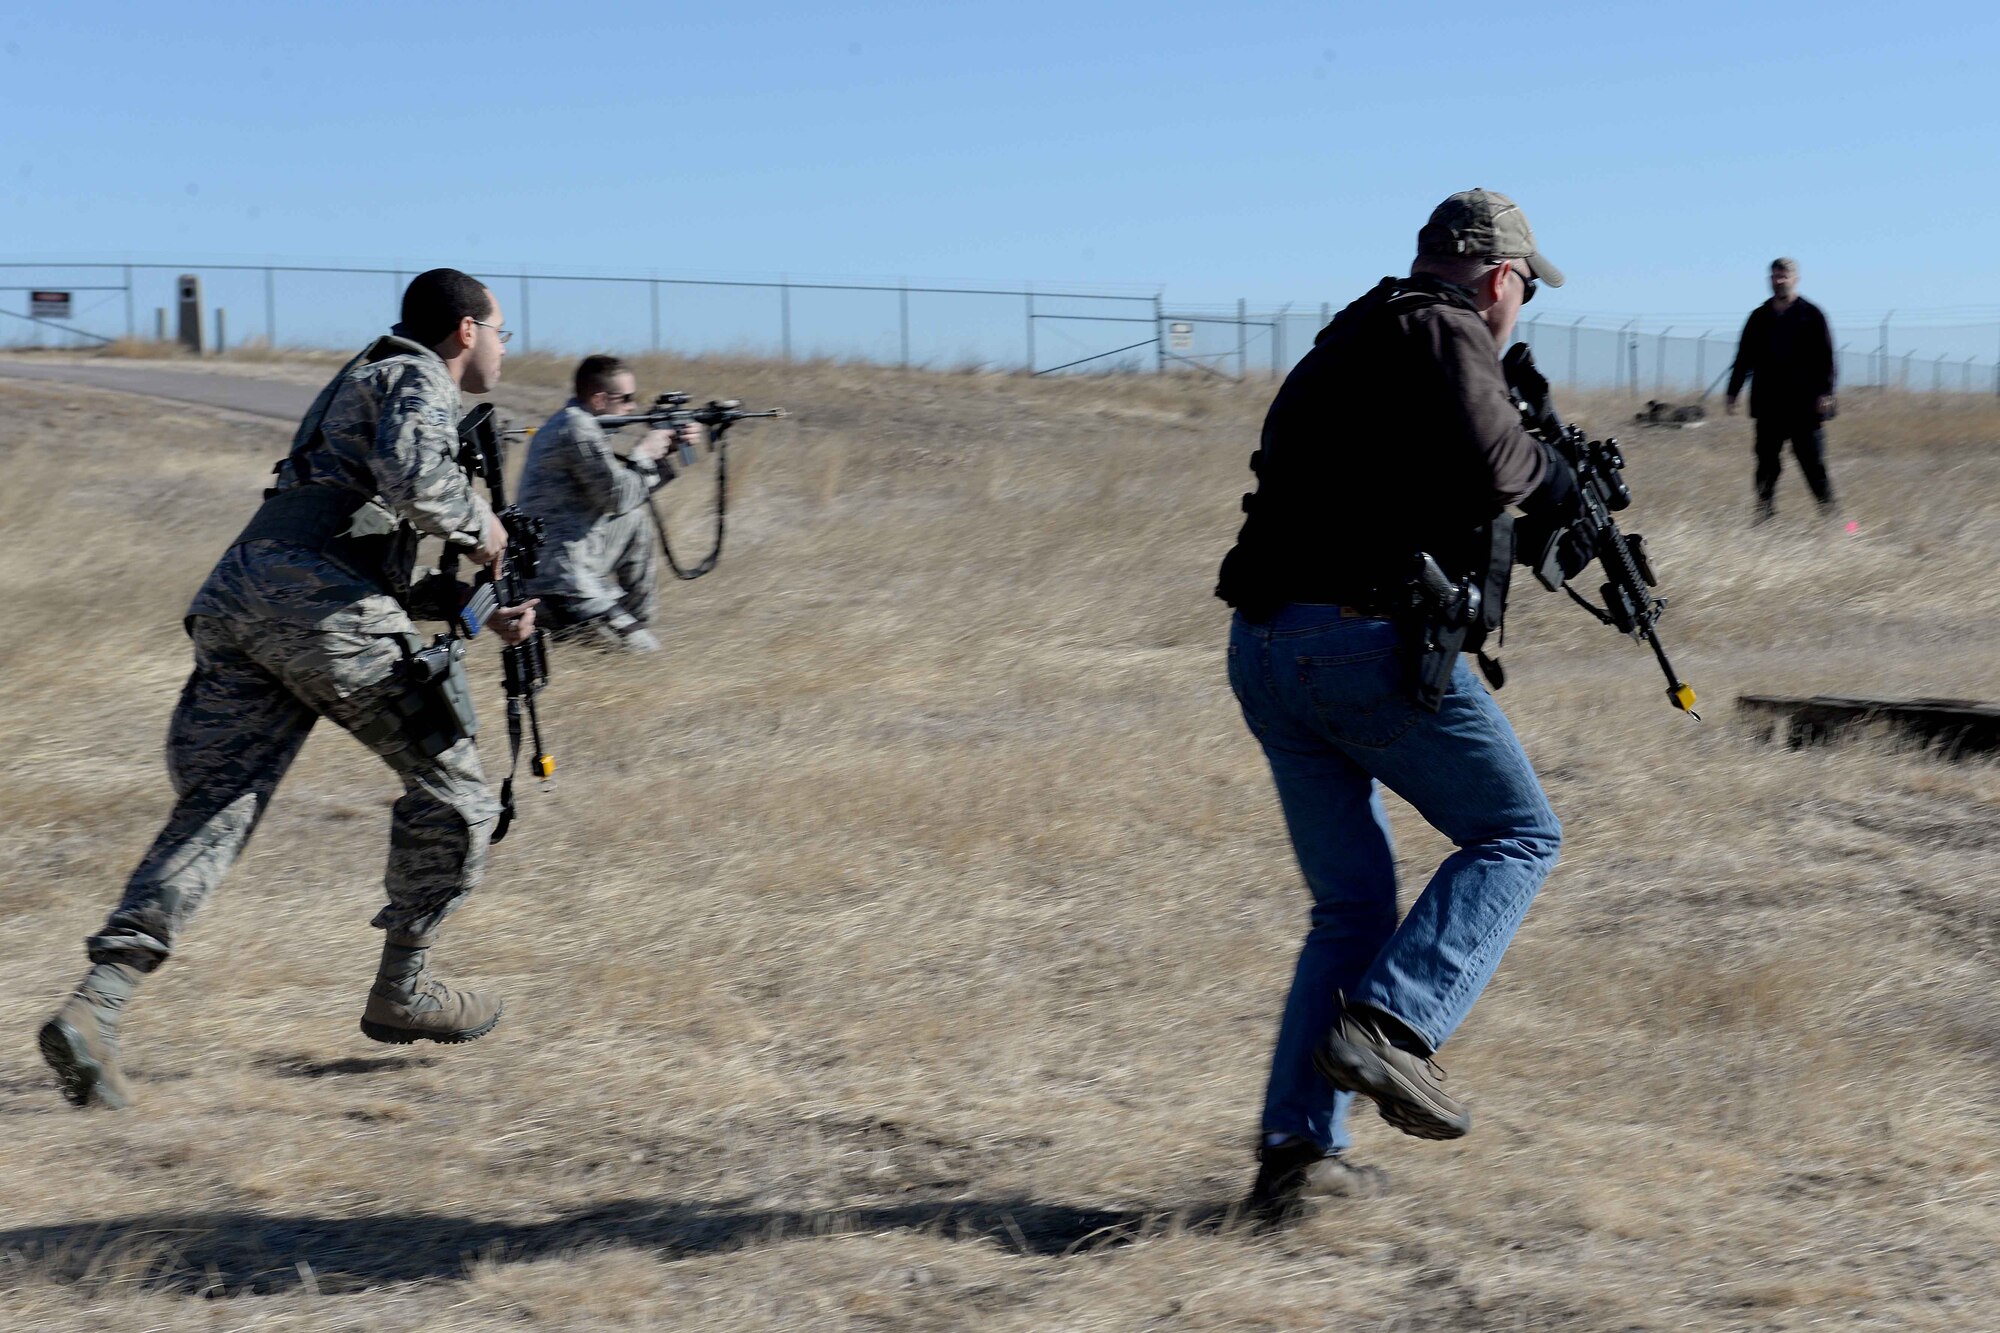 Senior Airman Deandre Smith, 28th Security Forces Squadron response force leader (left) and John Kost, 28th SFS flight chief, participate in shoot- move-communicate training at Ellsworth Air Force Base, S.D., March 10, 2015. This training teaches Airmen how to effectively engage their target, communicate and protect each other in combat situations. (U.S. Air Force photo by Airman 1st Class Rebecca Imwalle/Released)